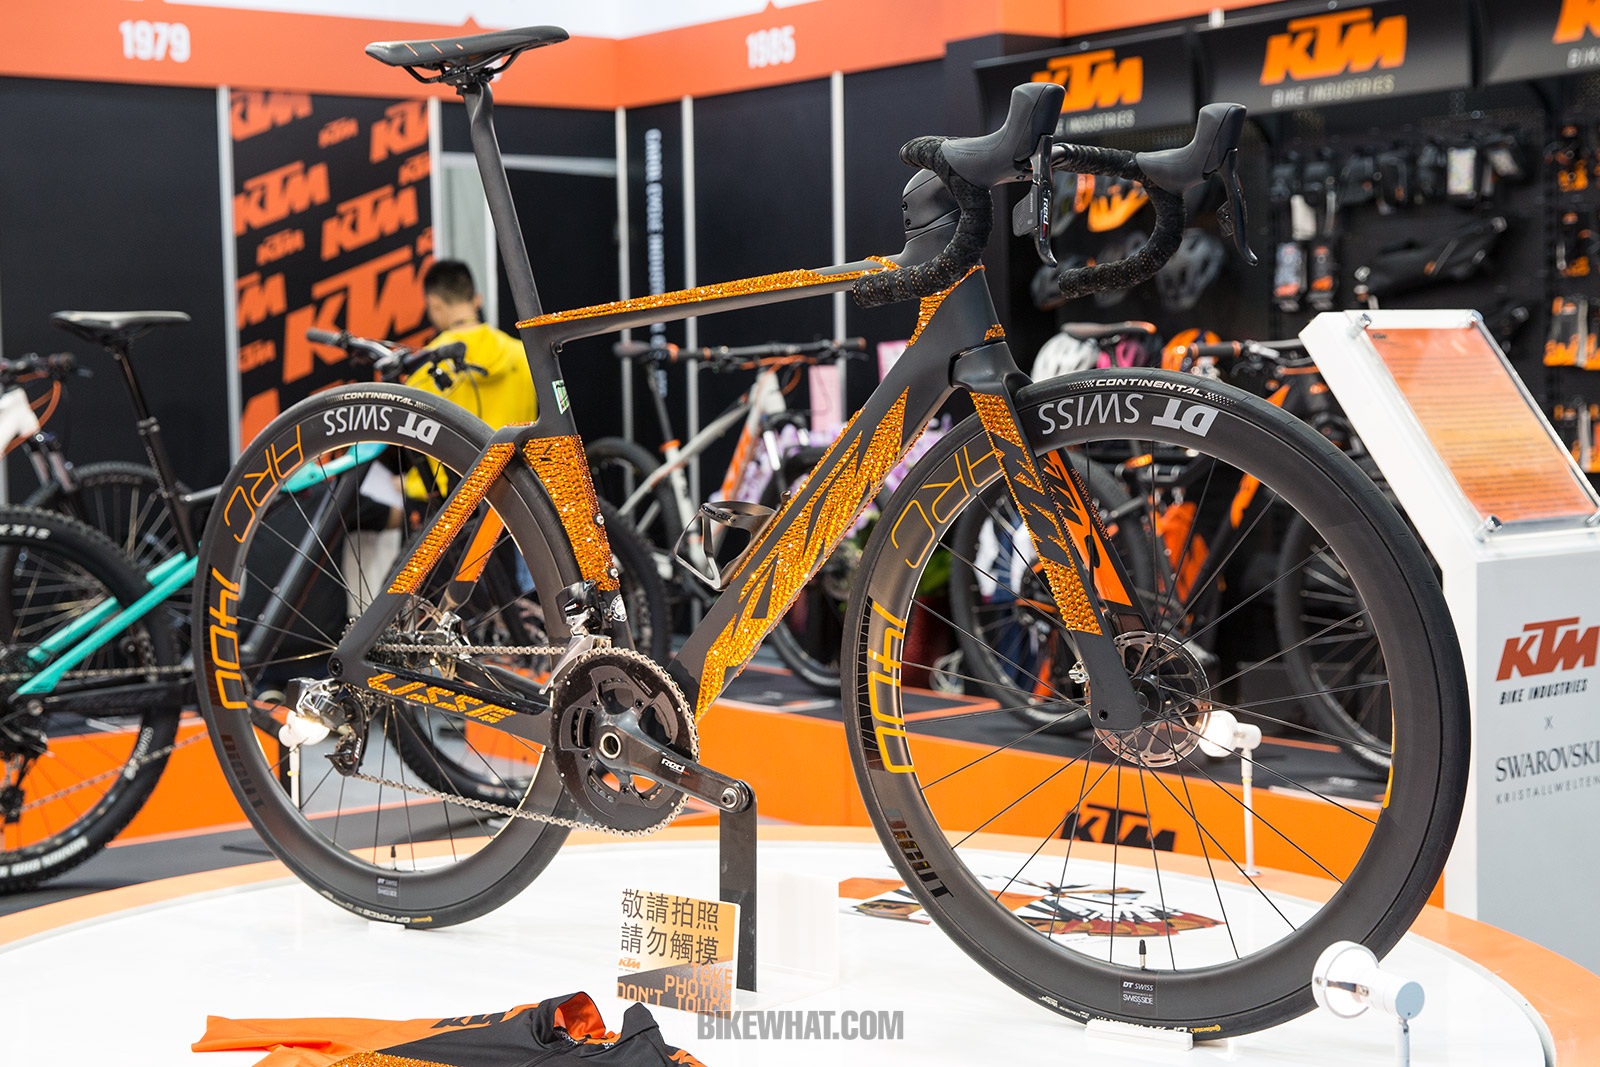 Feature_TaipeiCycle_2019_KTM_1.jpg